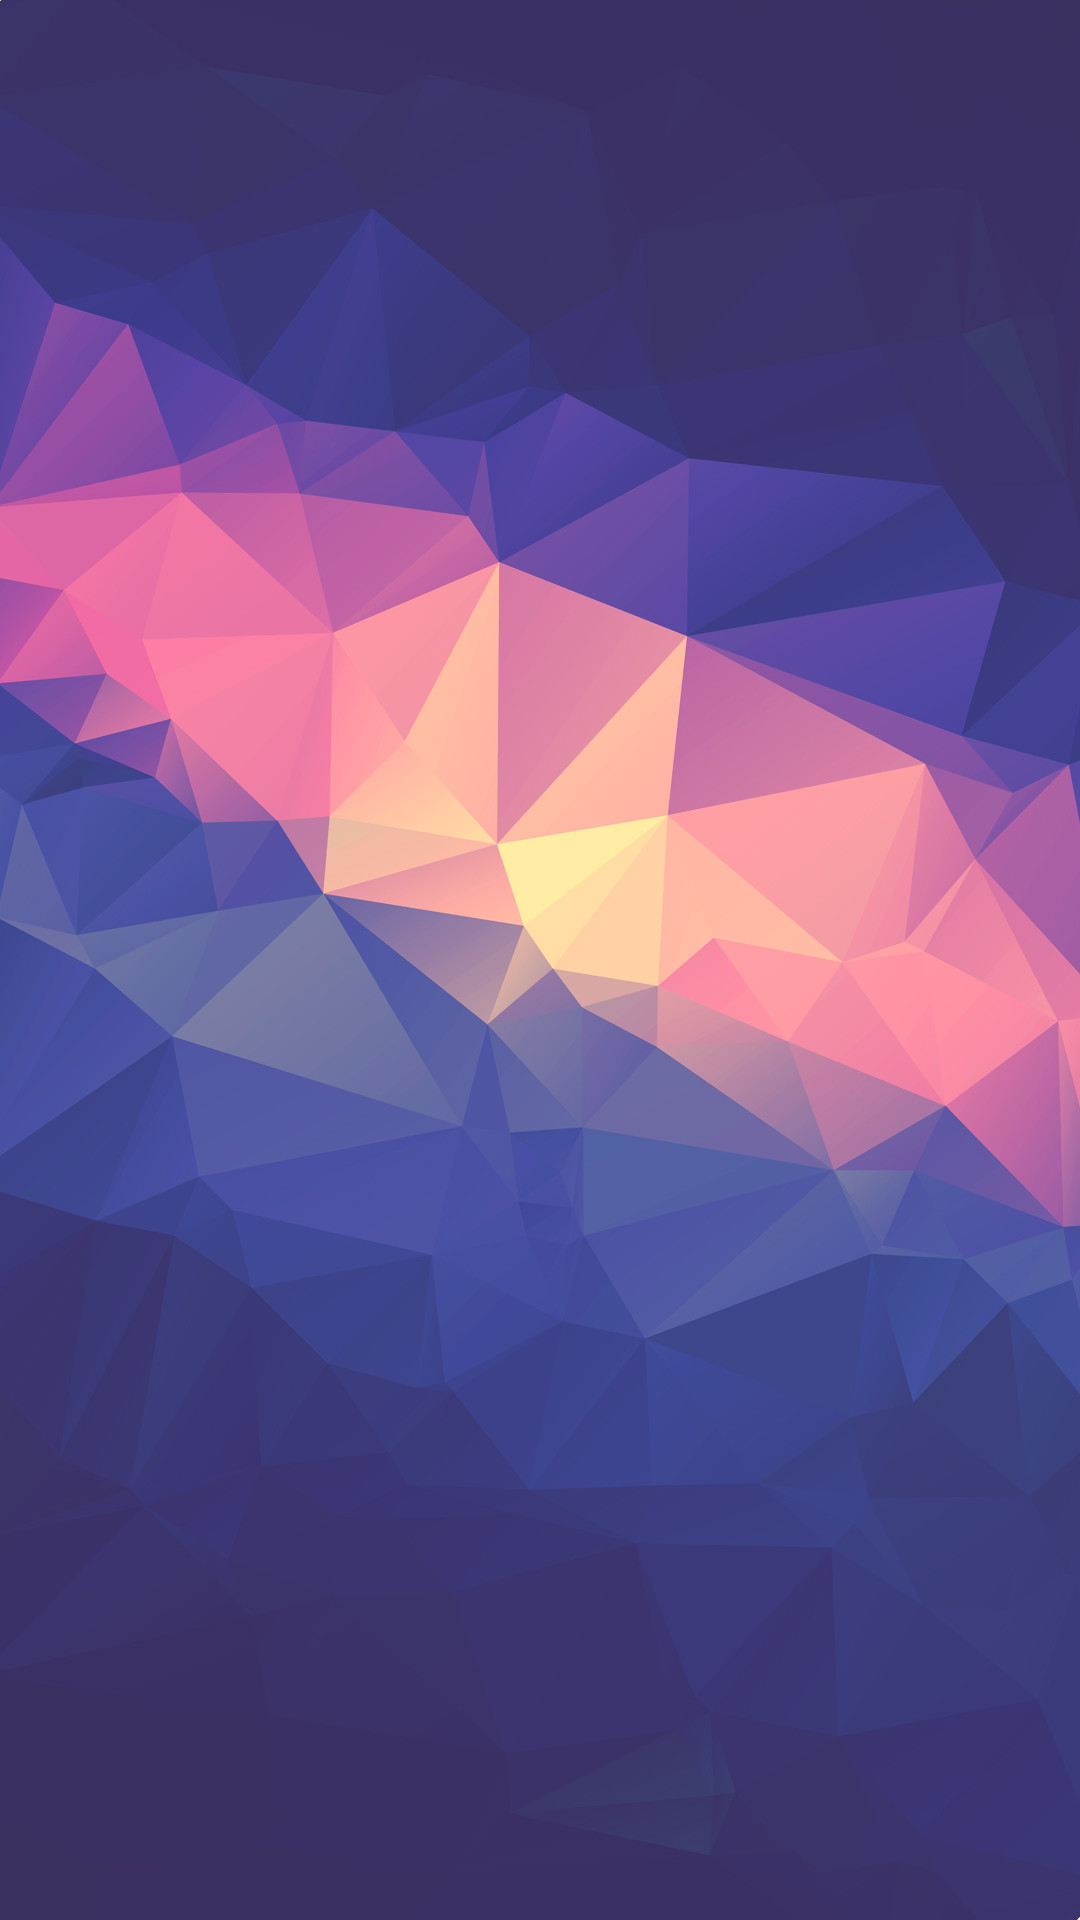 1080x1920 Neon Low Poly Triangles iPhone 6+ HD Wallpaper ...